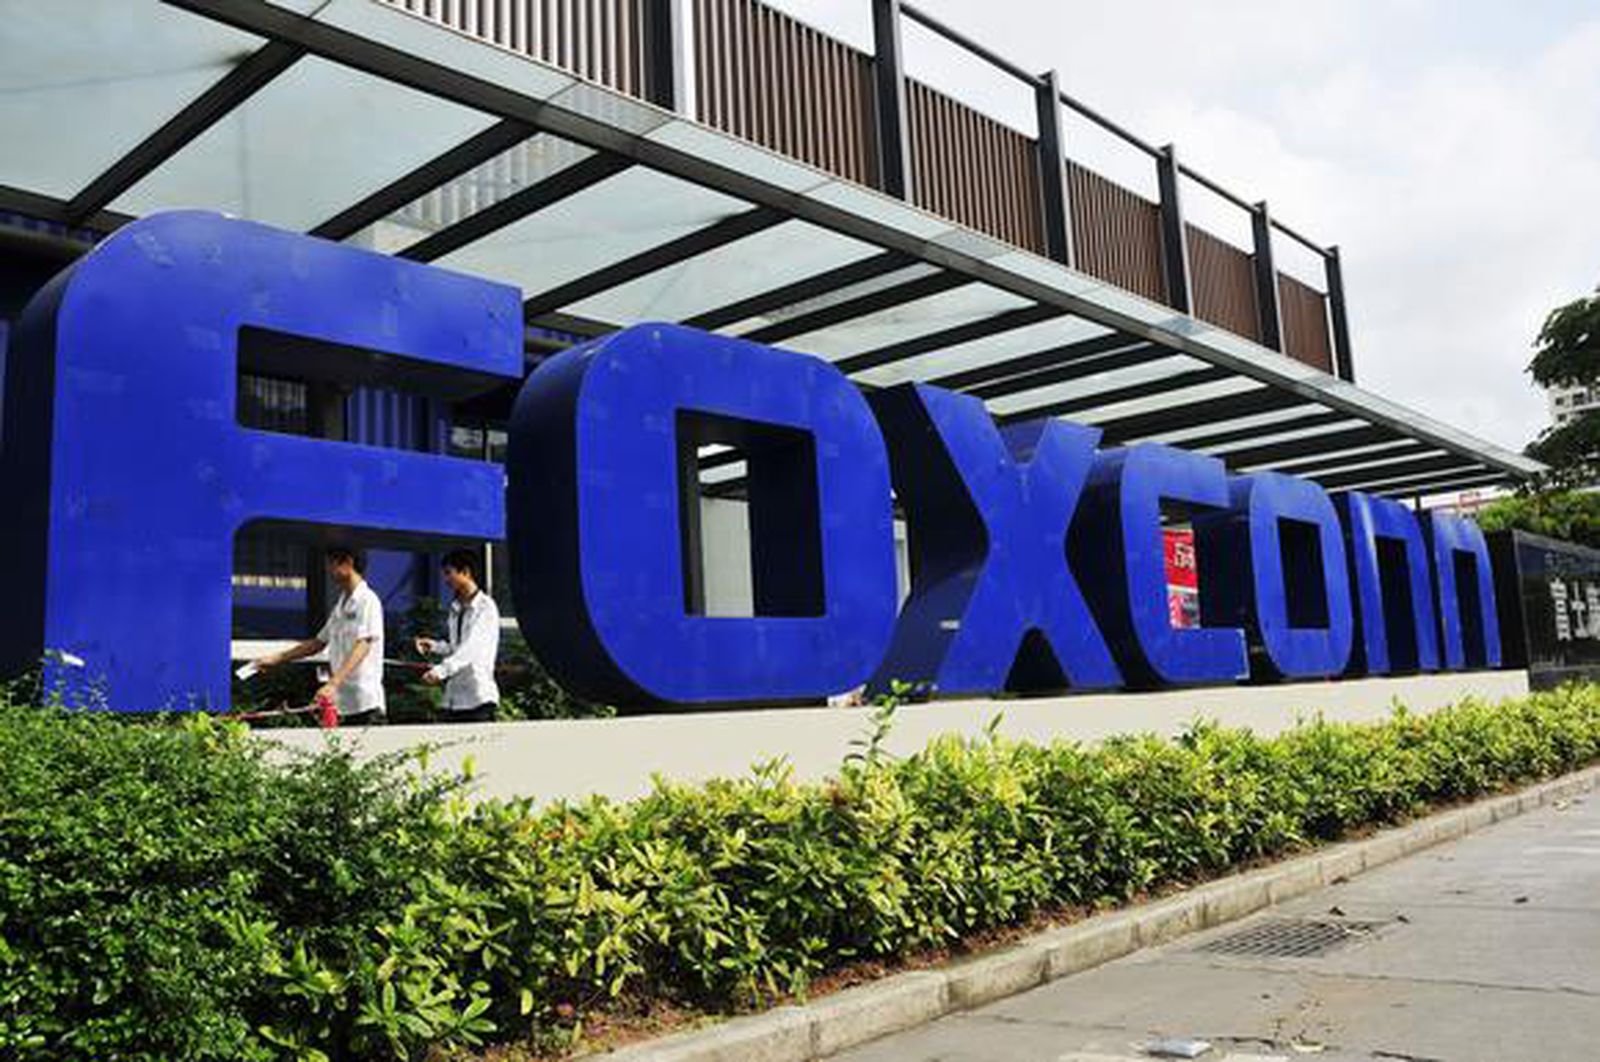 Foxconn Offers Big Bonuses to Recruit Workers Ahead of Lunar New Year Holiday